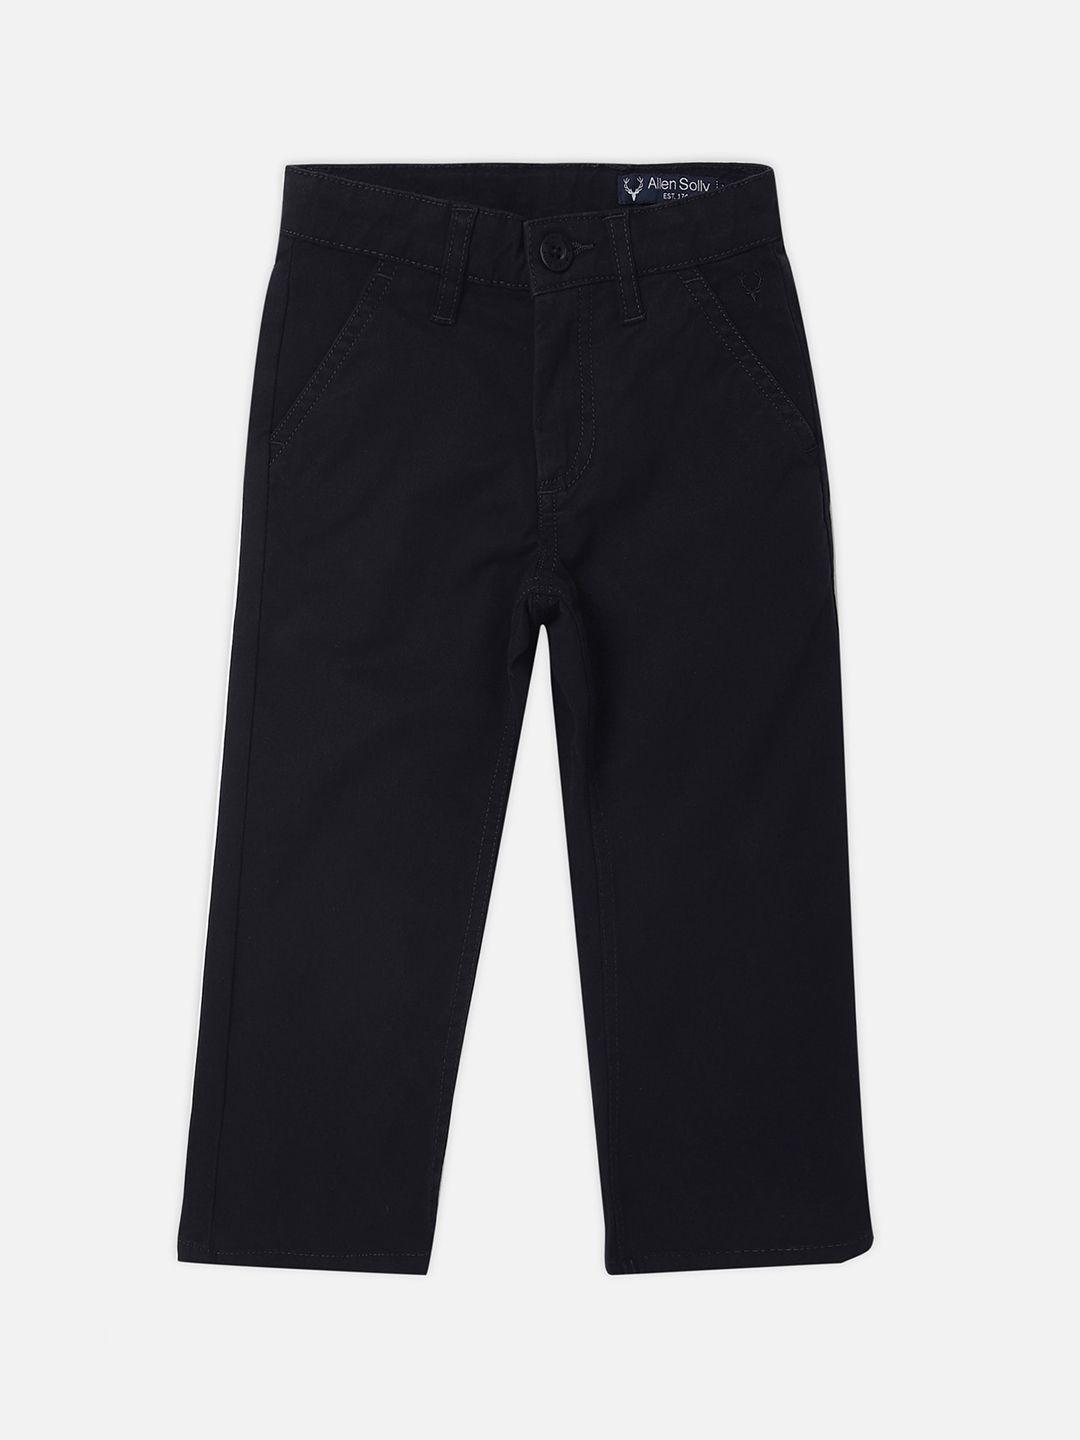 allen solly junior boys slim fit chinos trousers